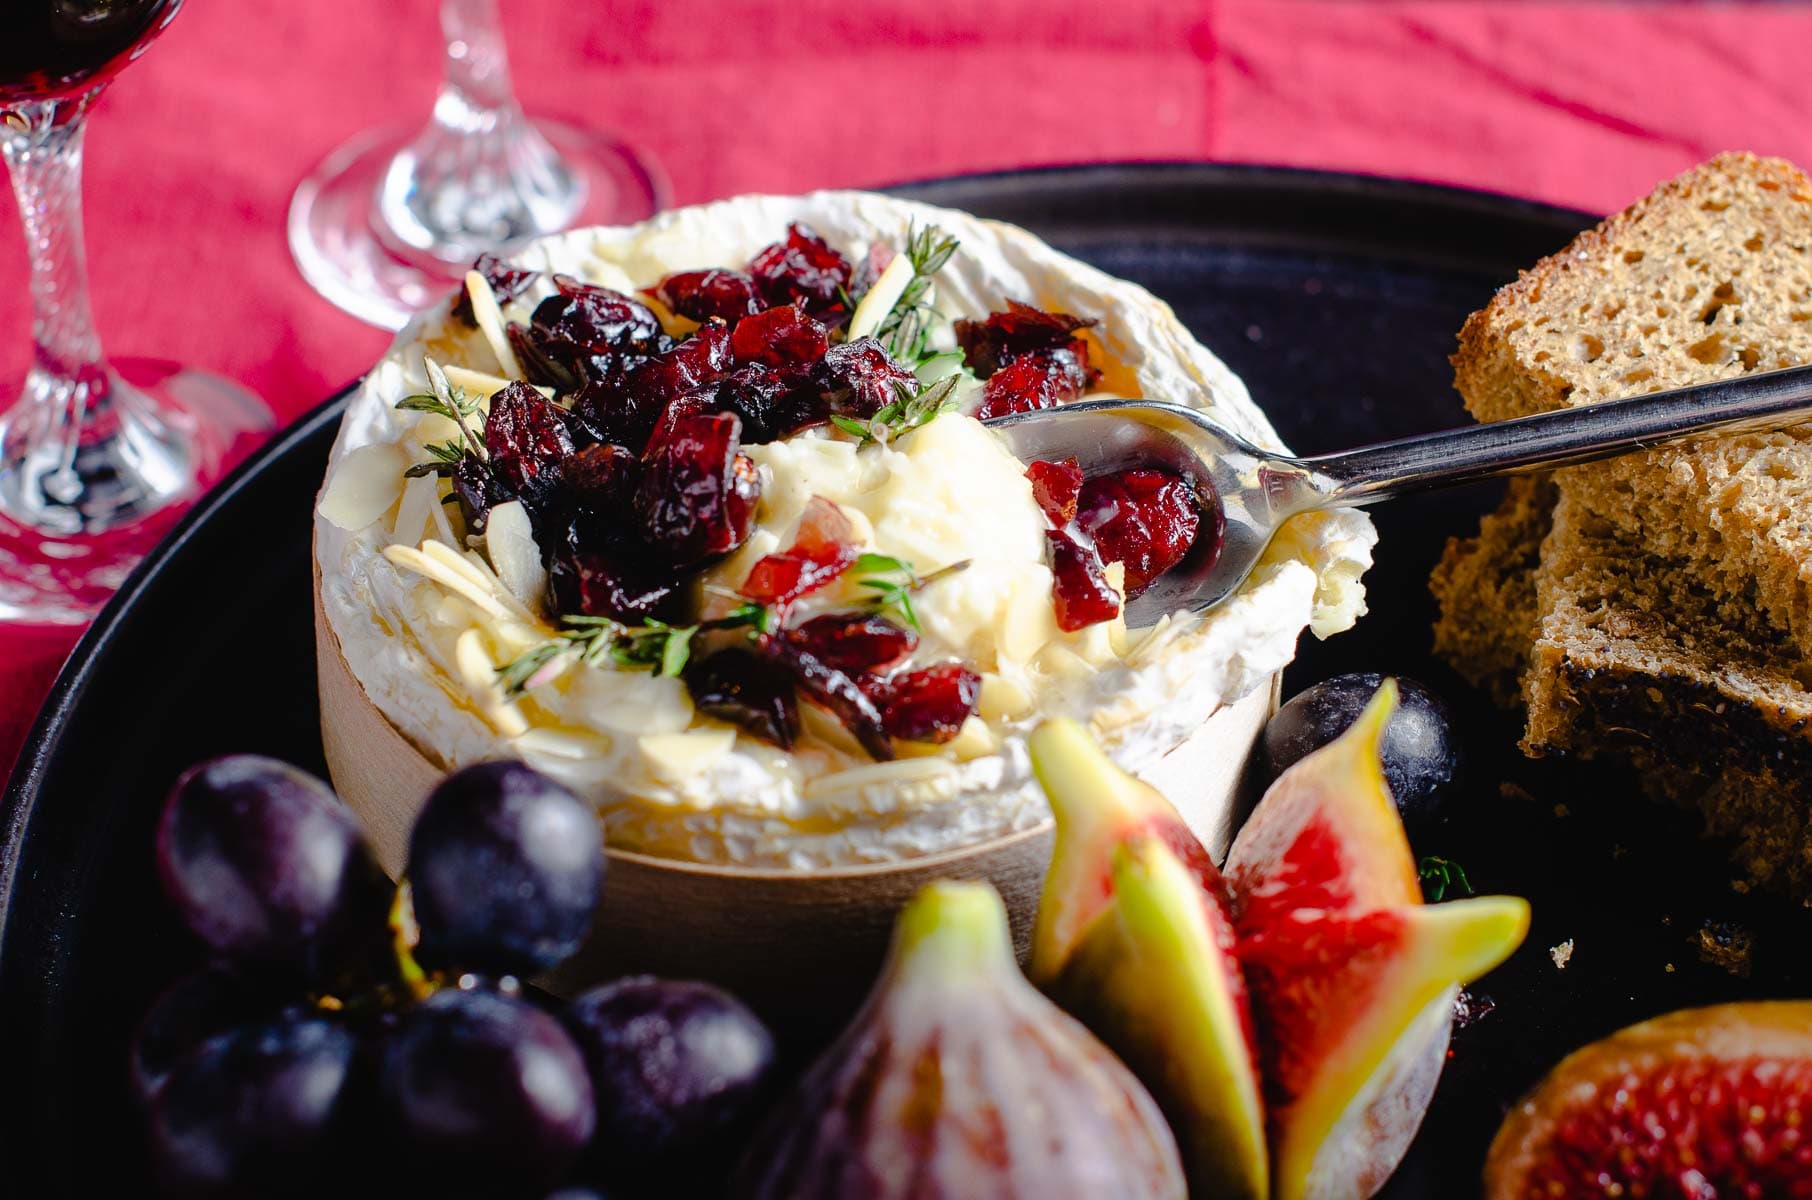 A decadent cheeseboard served with a whole baked cheese topped with cranberries, thyme and almonds and served with fresh figs, black grapes and a nutty brown bread.